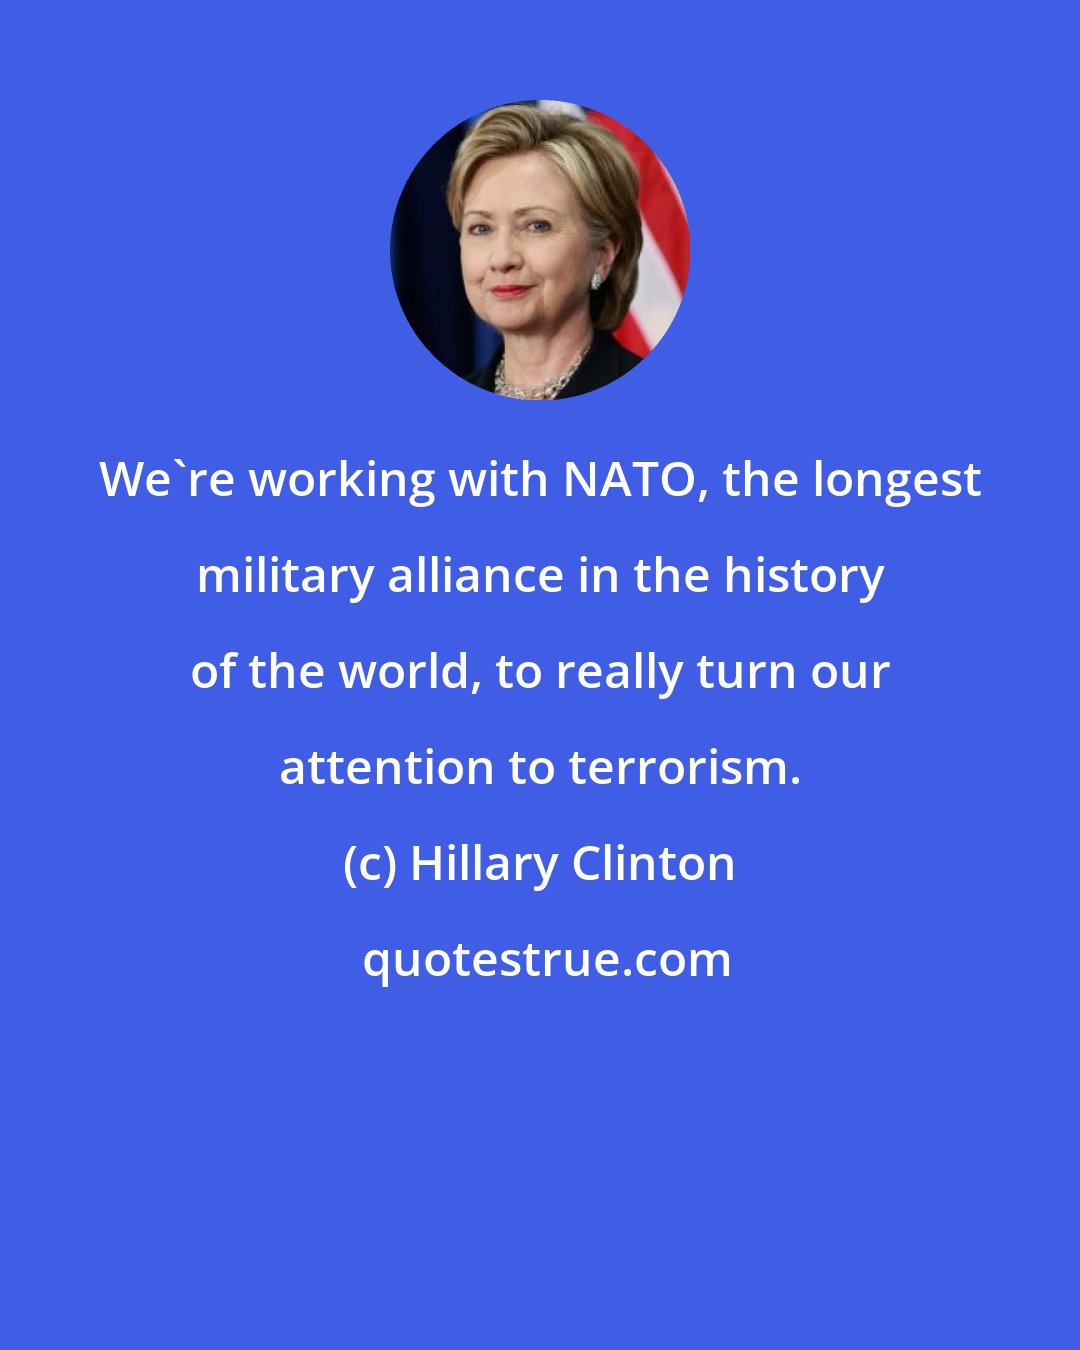 Hillary Clinton: We're working with NATO, the longest military alliance in the history of the world, to really turn our attention to terrorism.